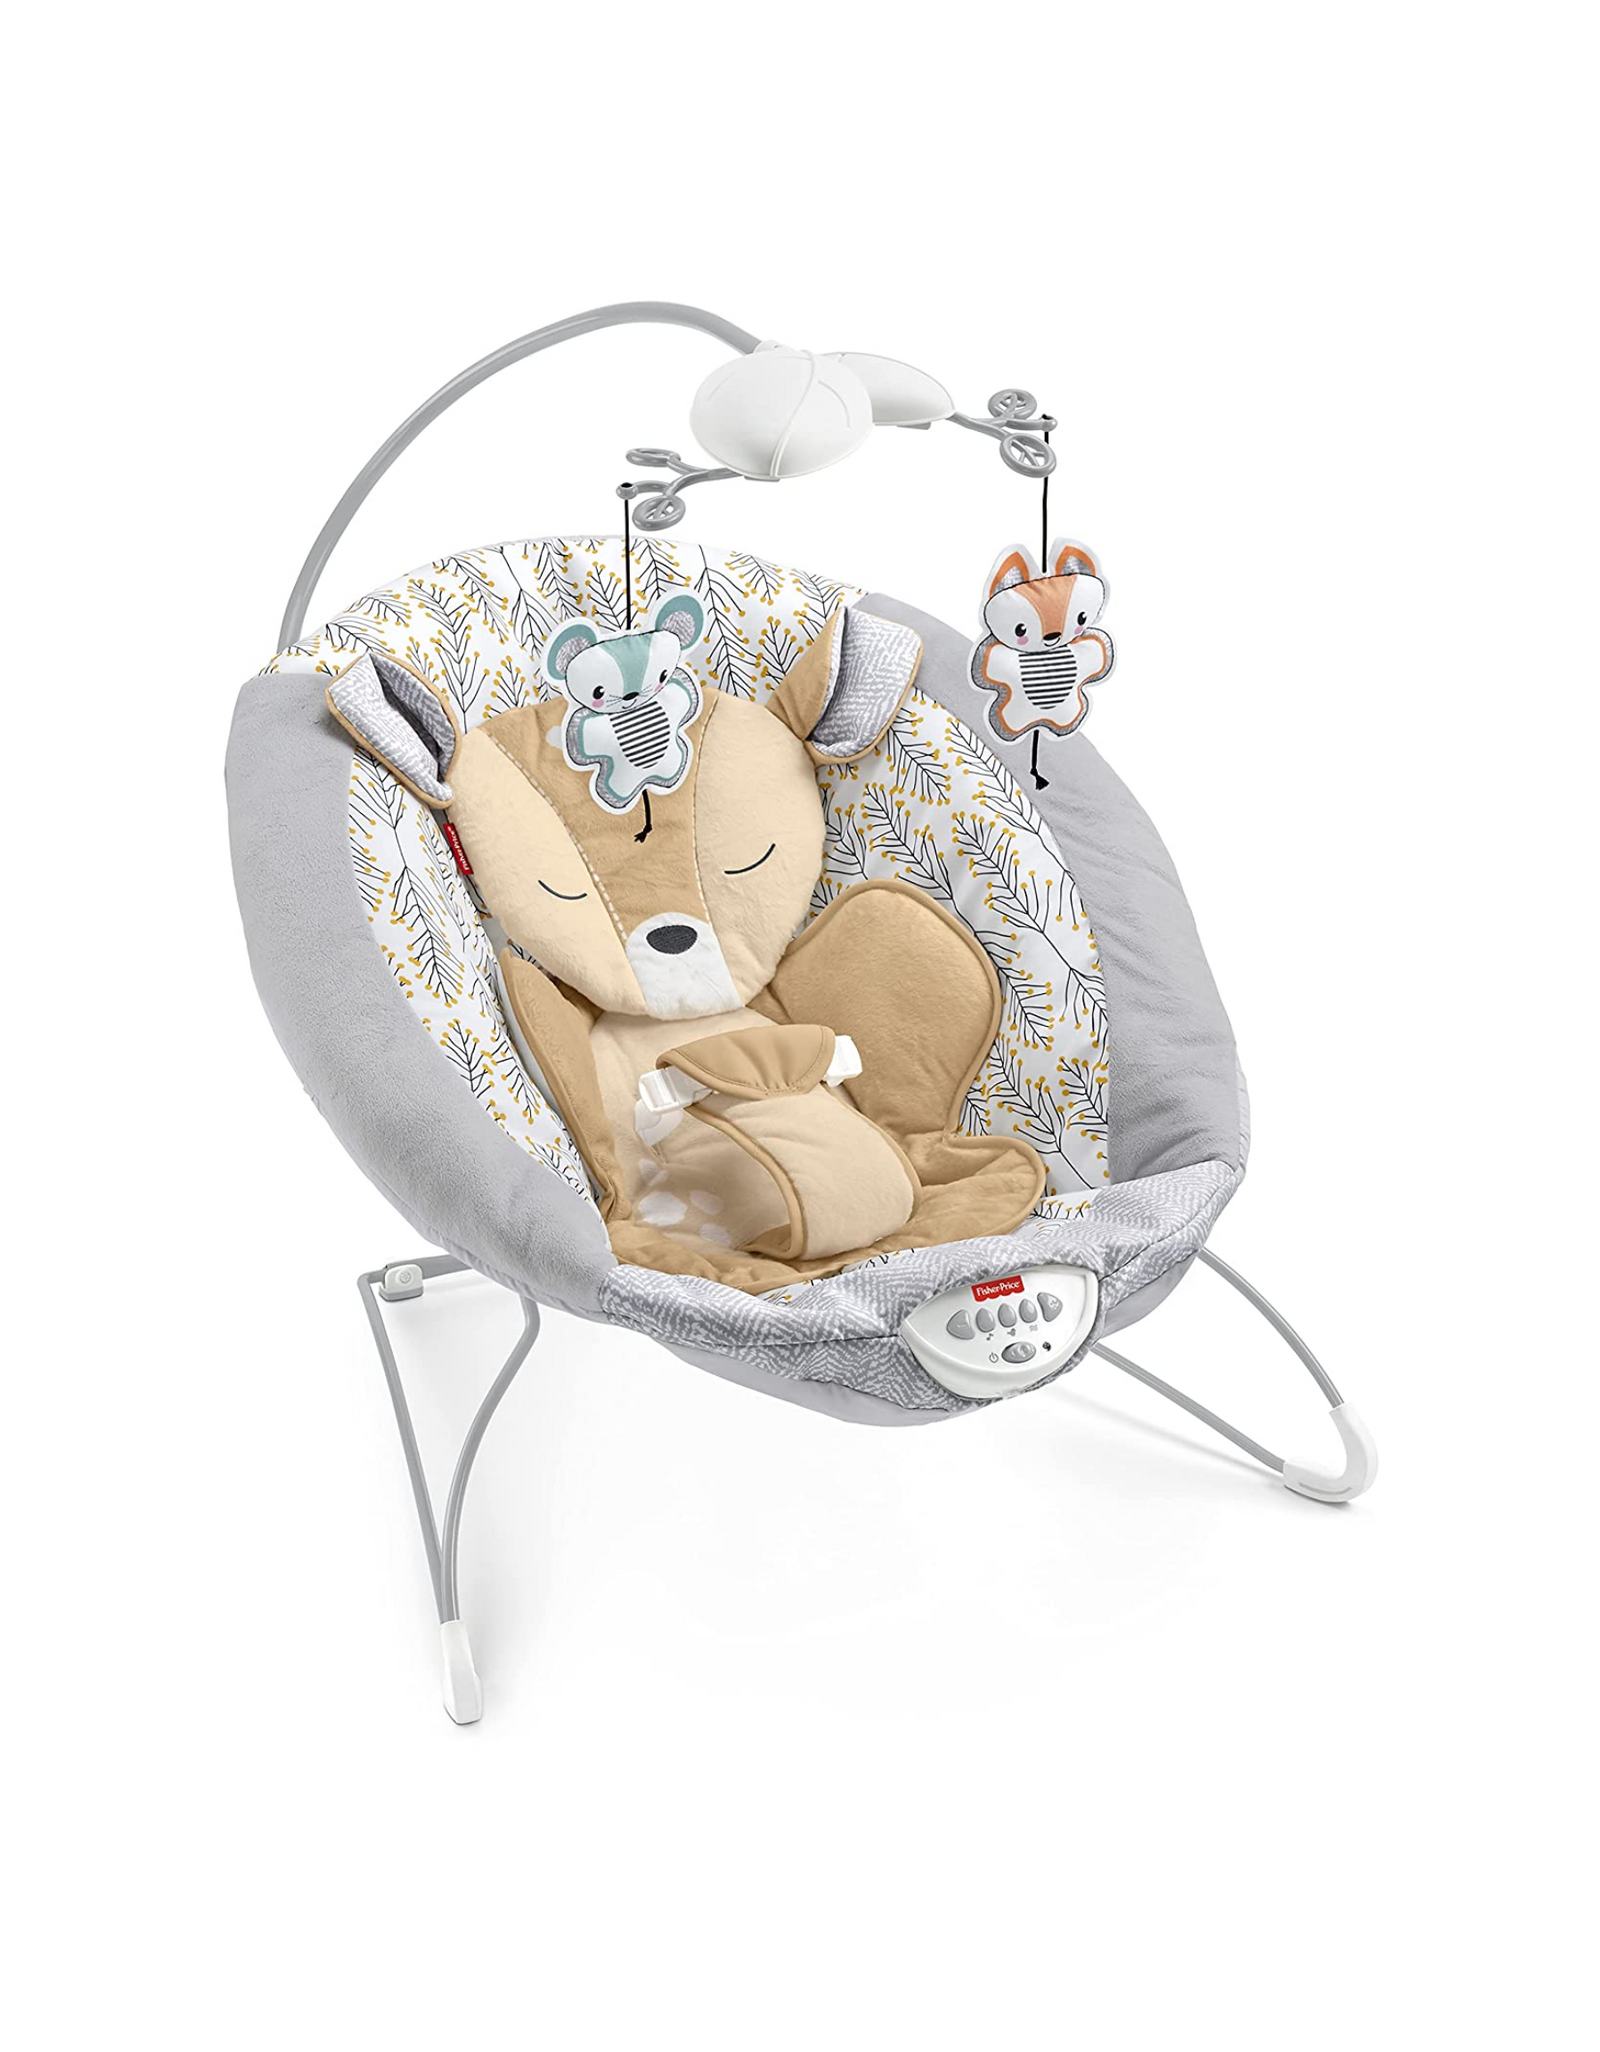 Fisher-Price Fawn Meadows Deluxe Bouncer, Portable Infant Seat - with Music and Vibrations